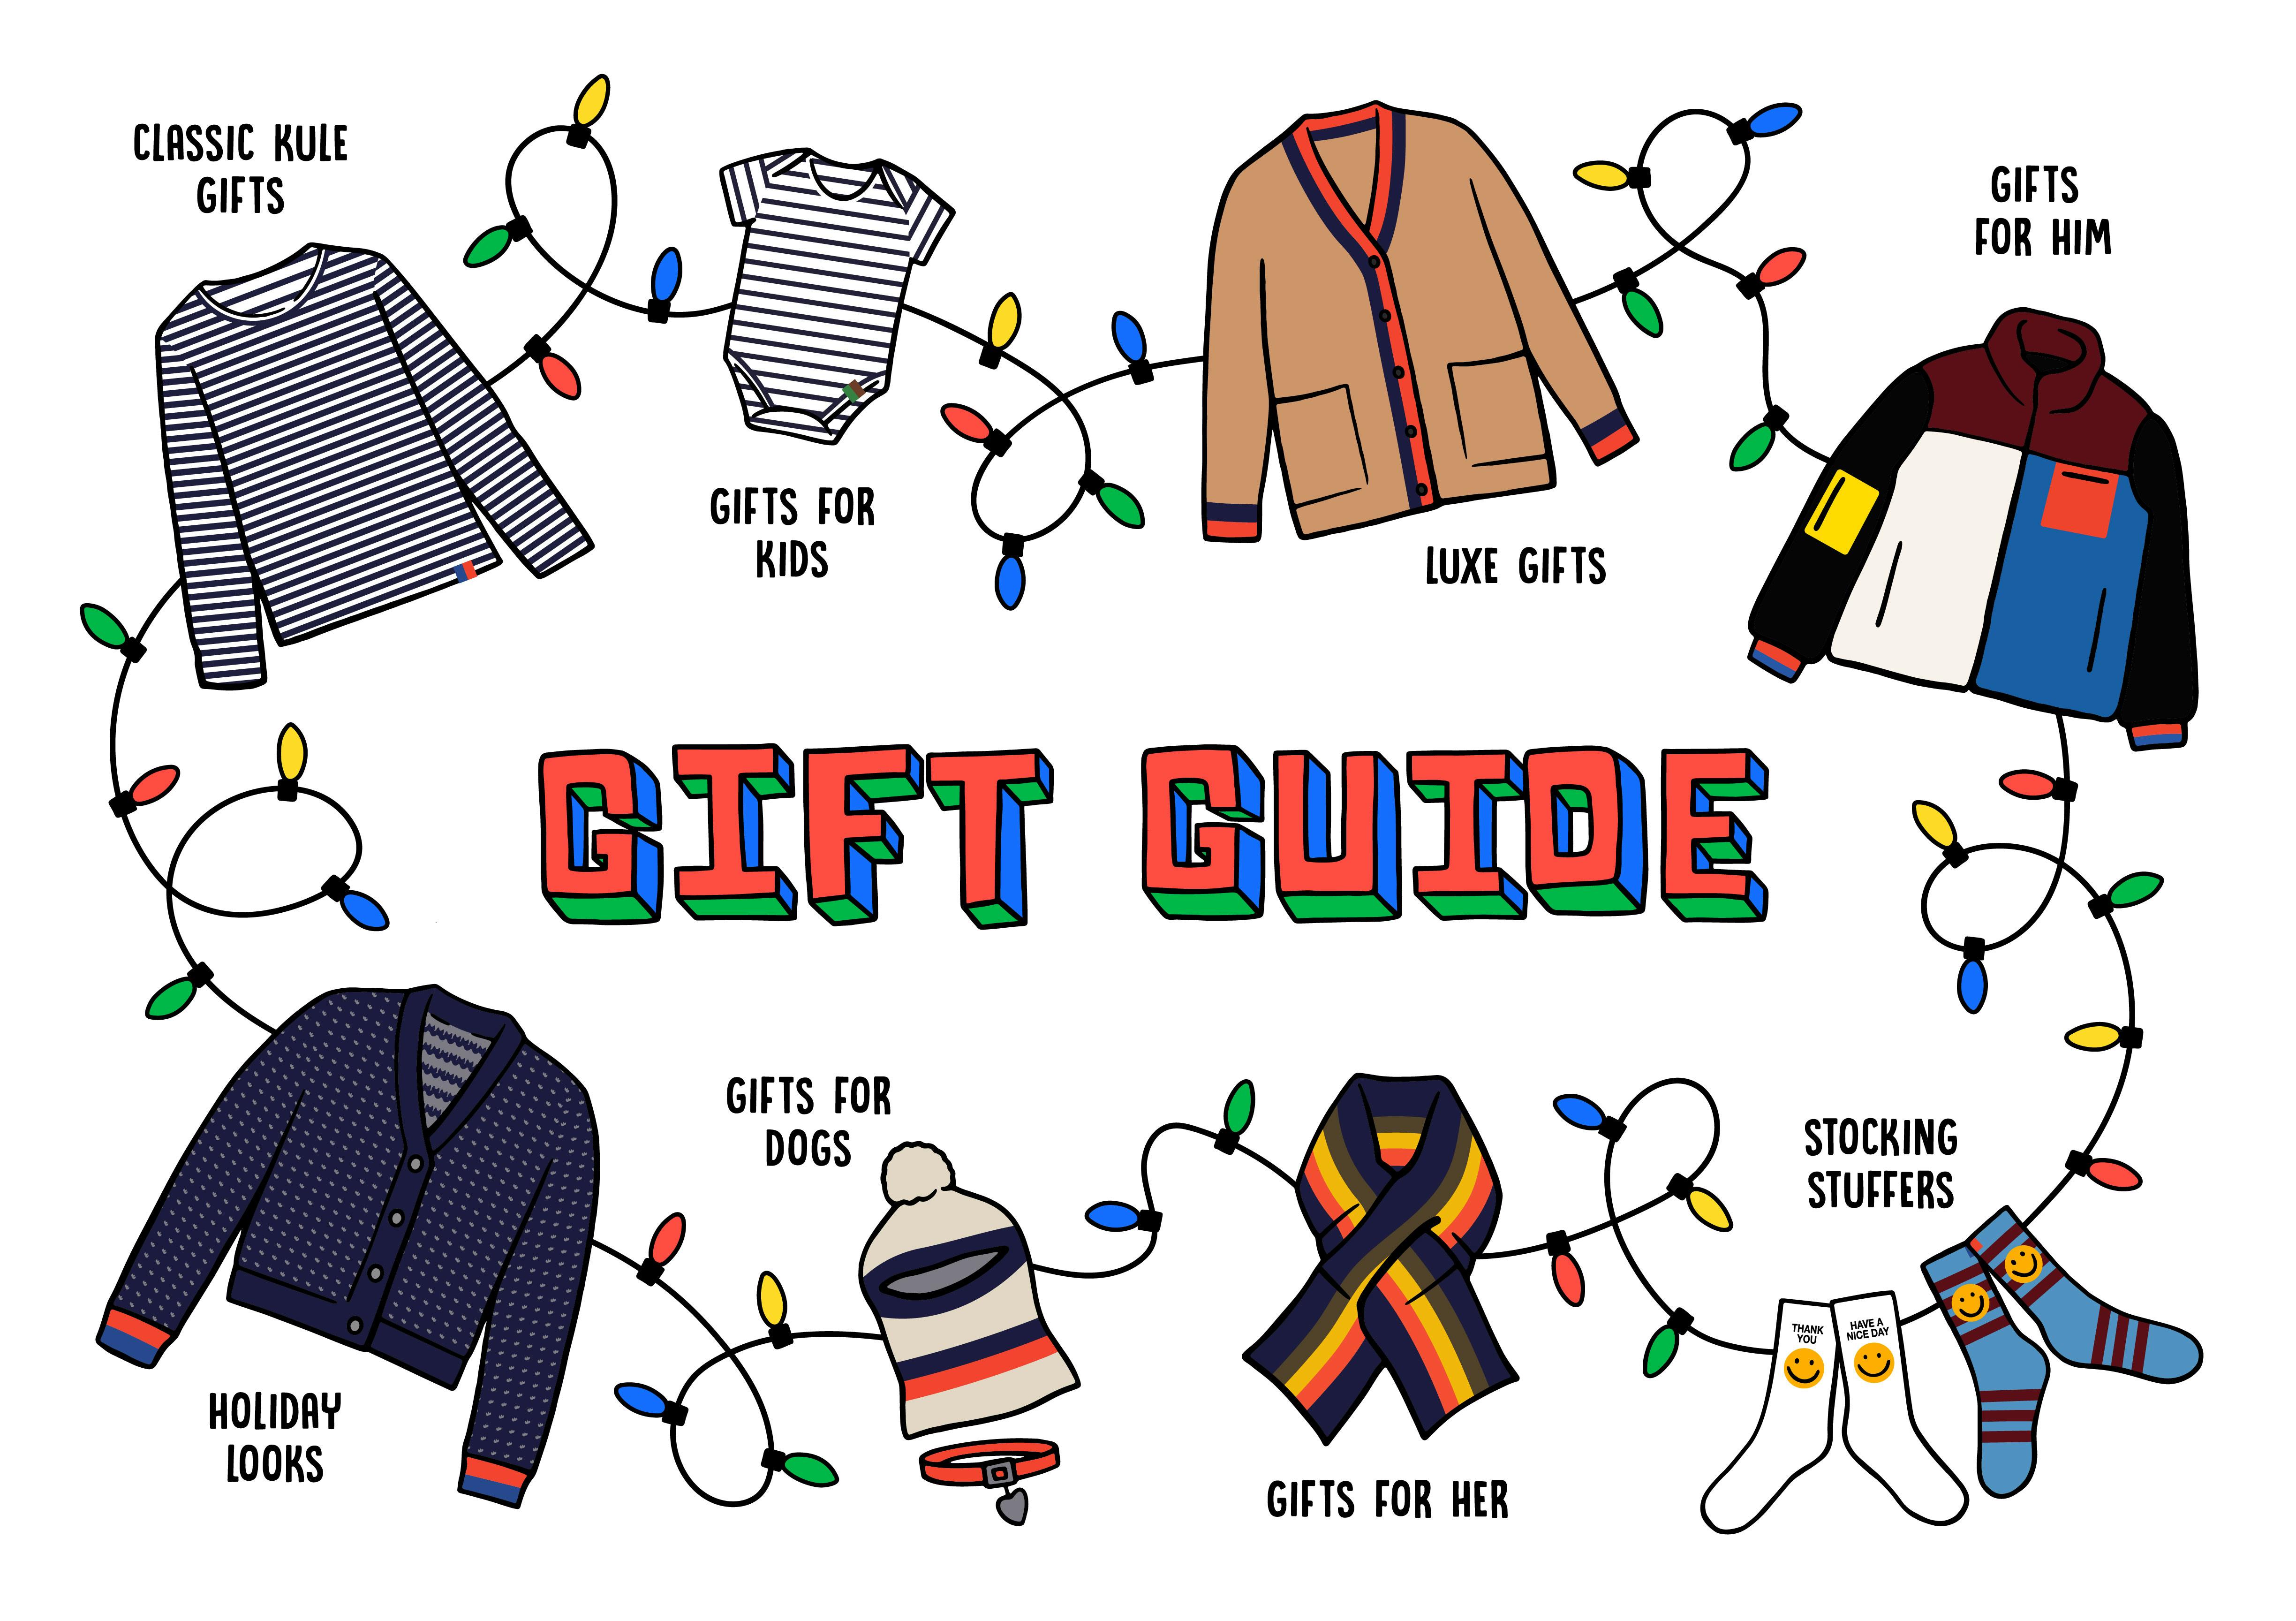 KULE Gift Guide illustration with tees, sweaters, hats, scarves and socks